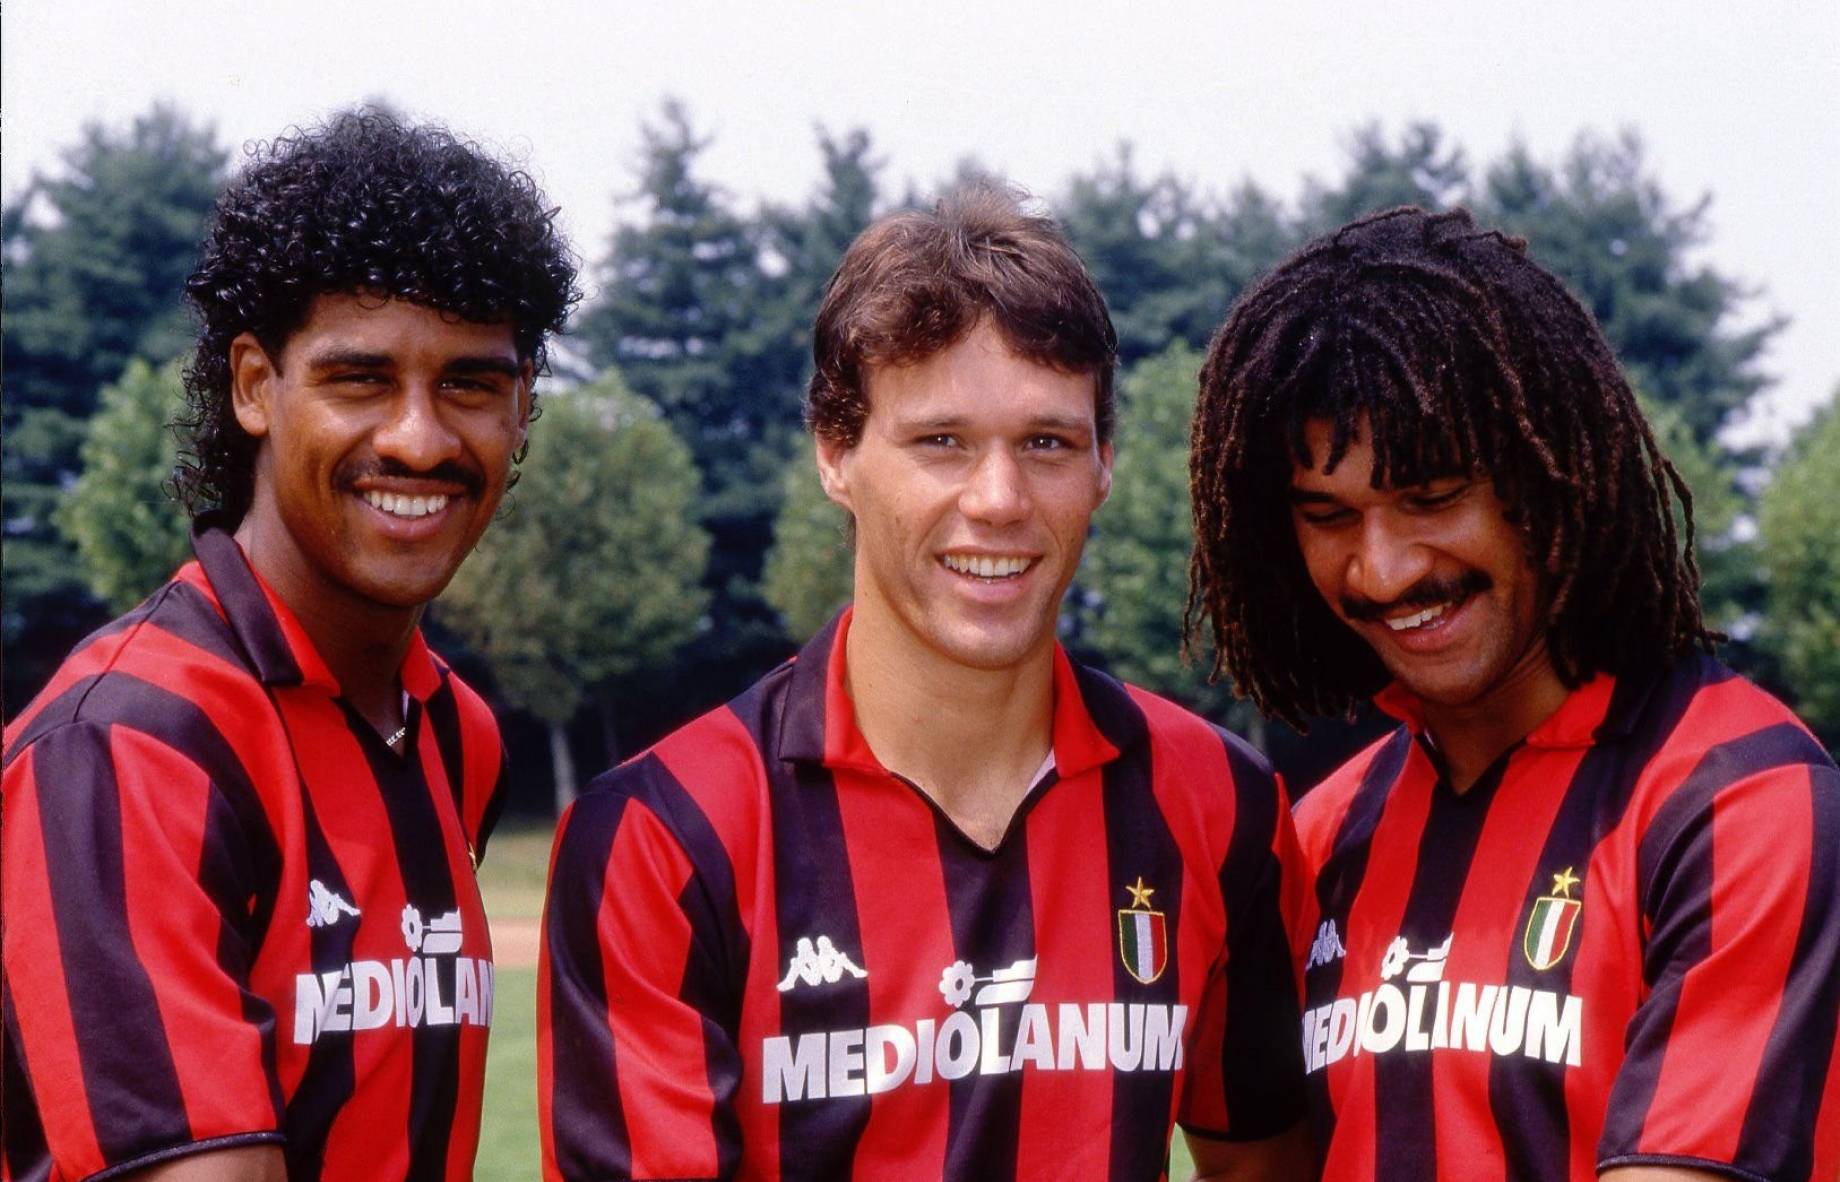 Gianluca Di Marzio :: Ruud Gullit: "Milan's young players are doing well, but are lacking experience"